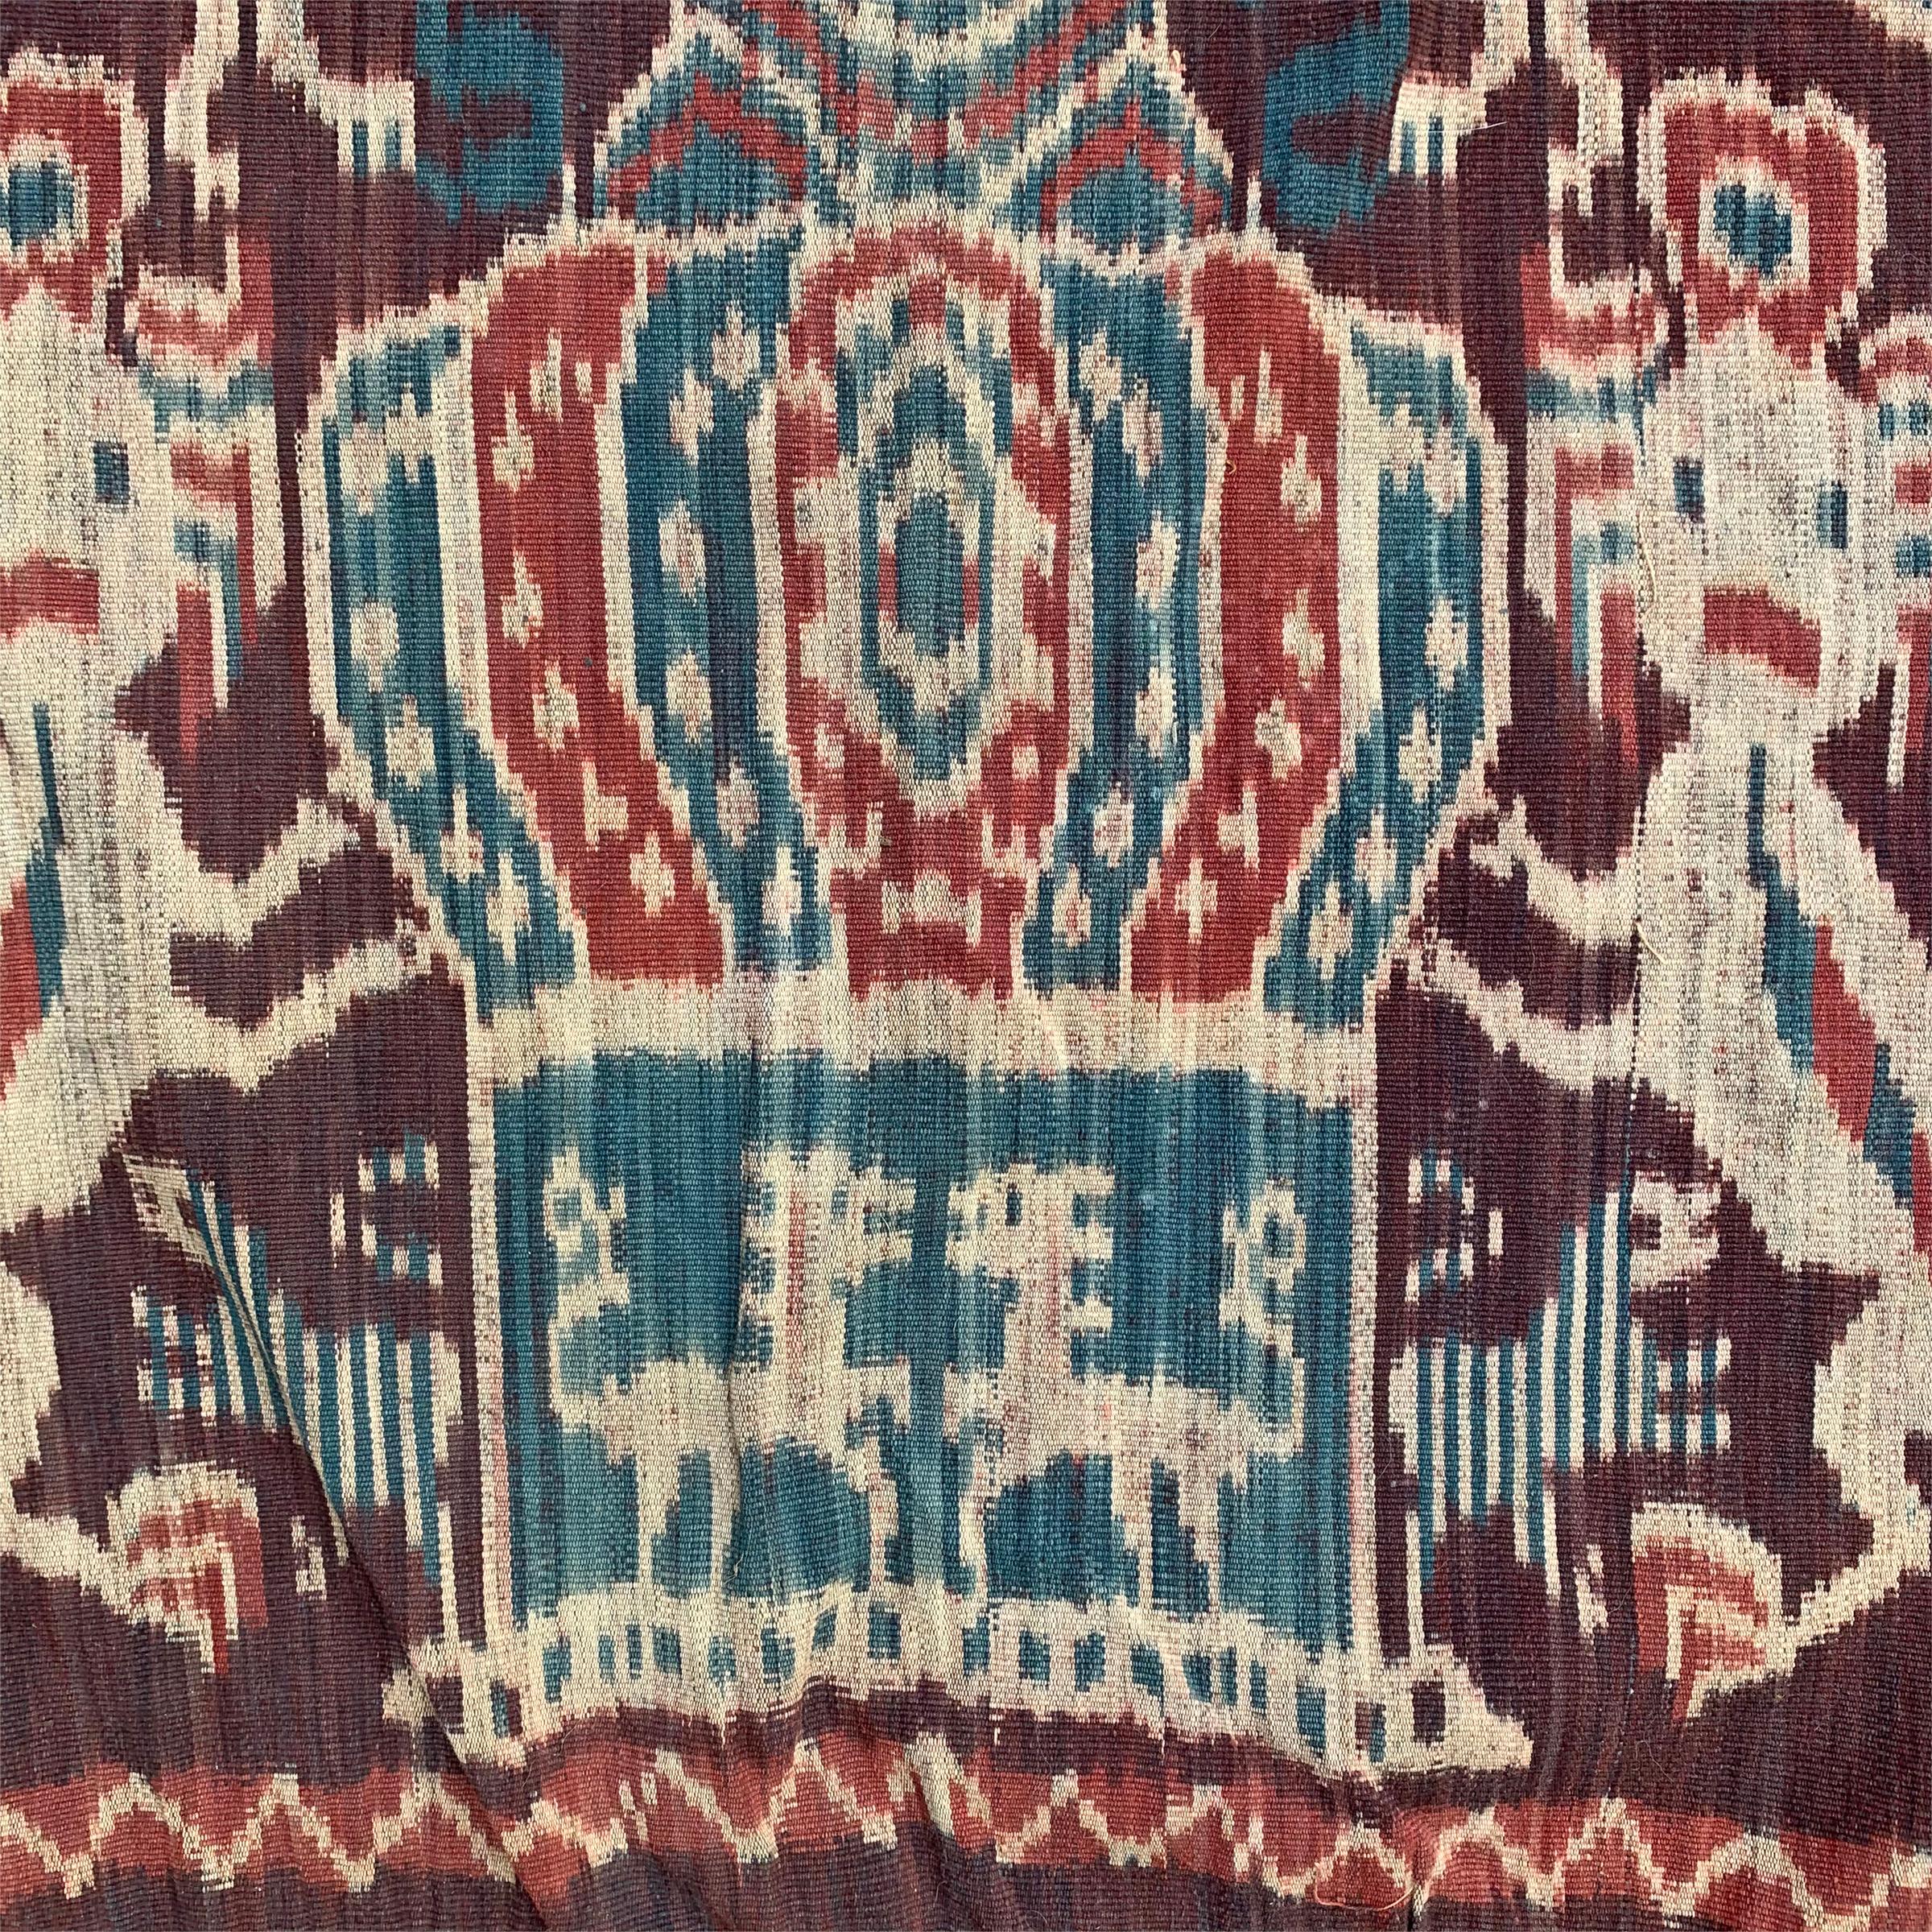 Hand-Woven 20th Century Indonesian Ikat Textile